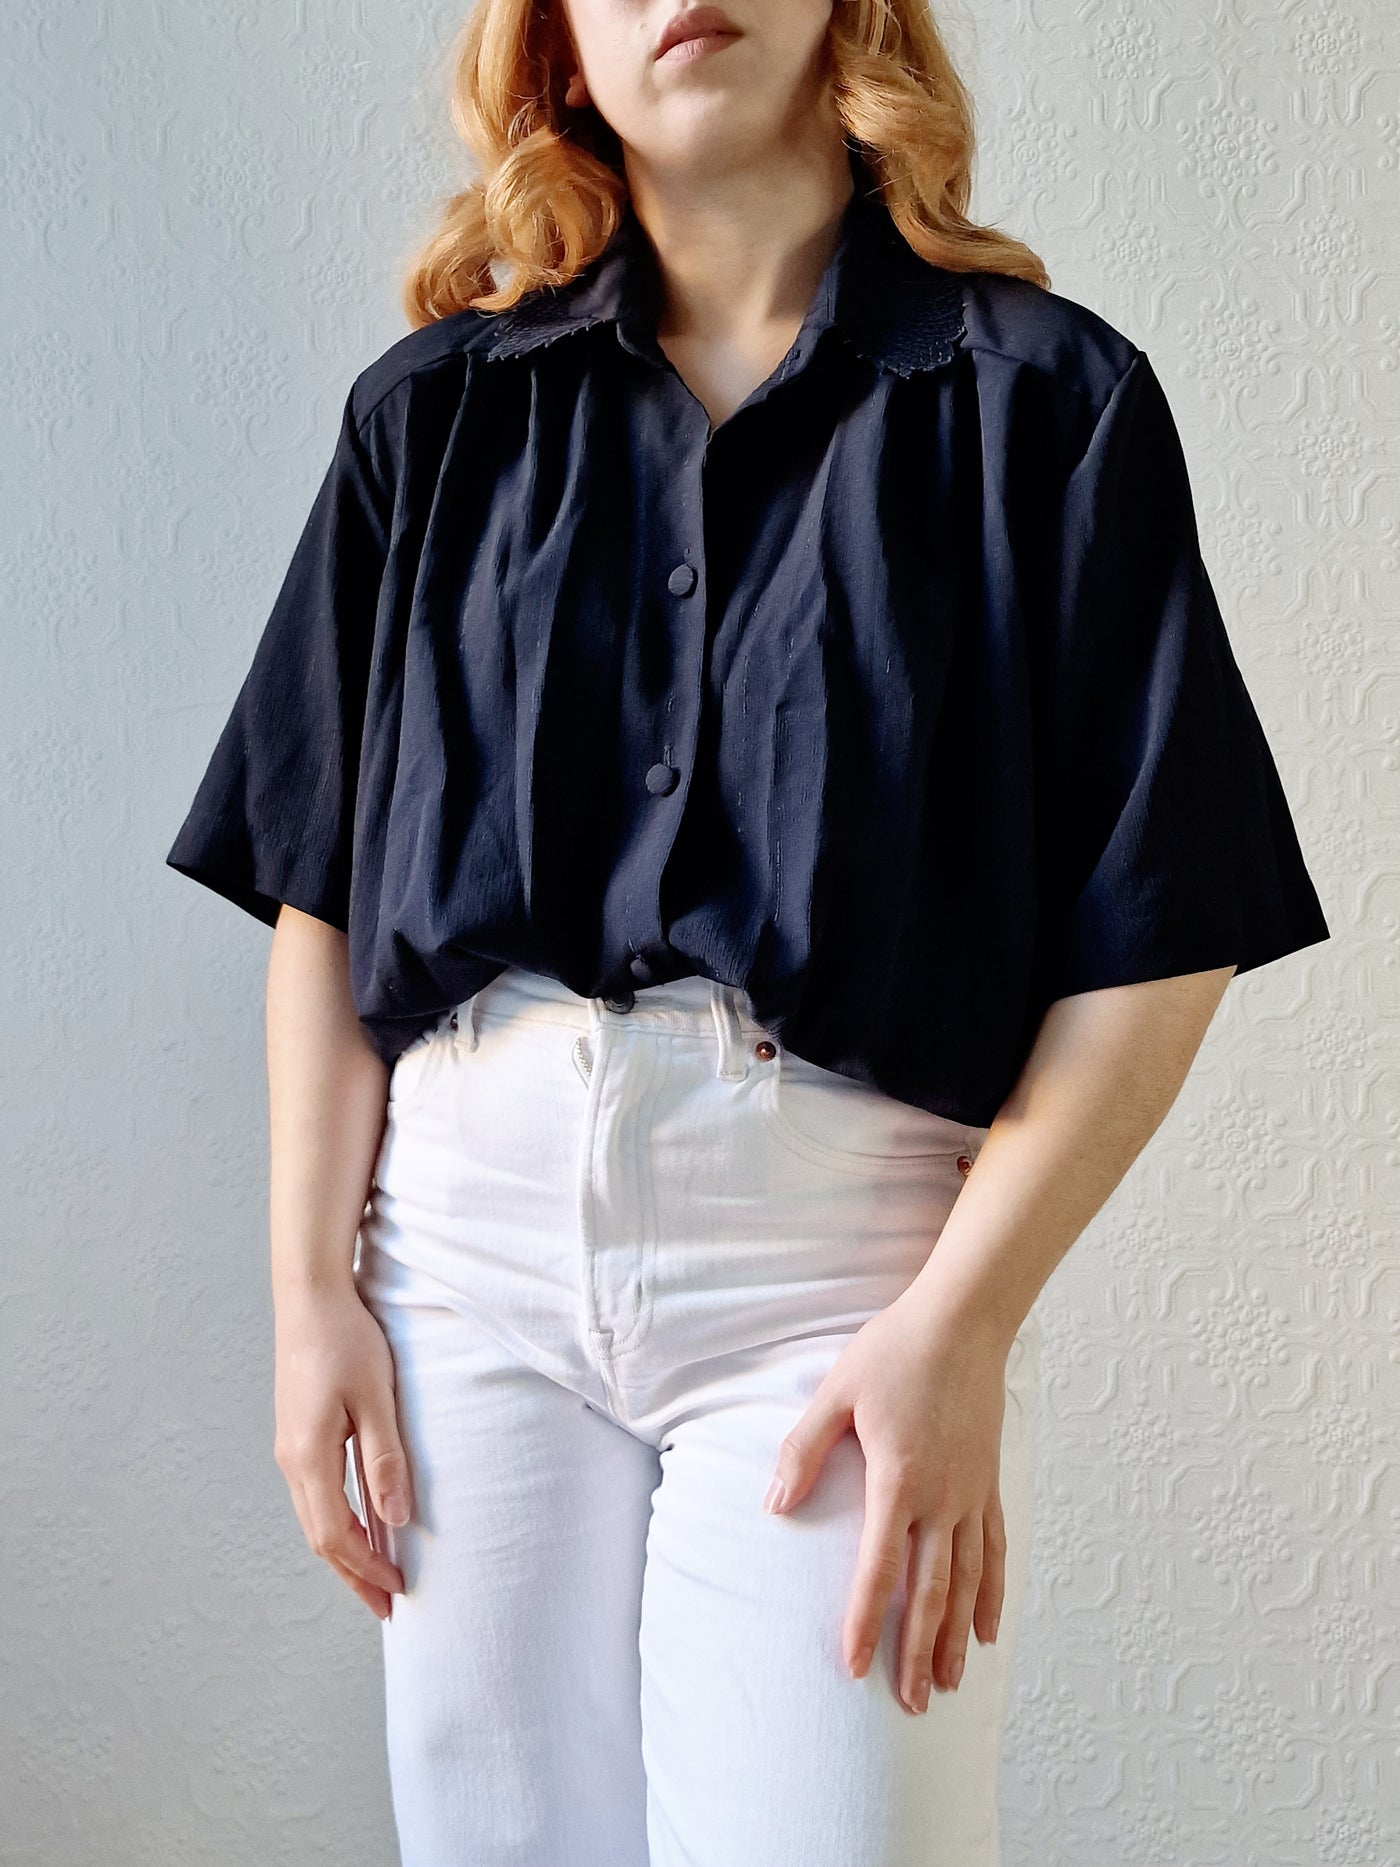 Vintage 80s Black Short Sleeve Blouse with Lace Collar - XL